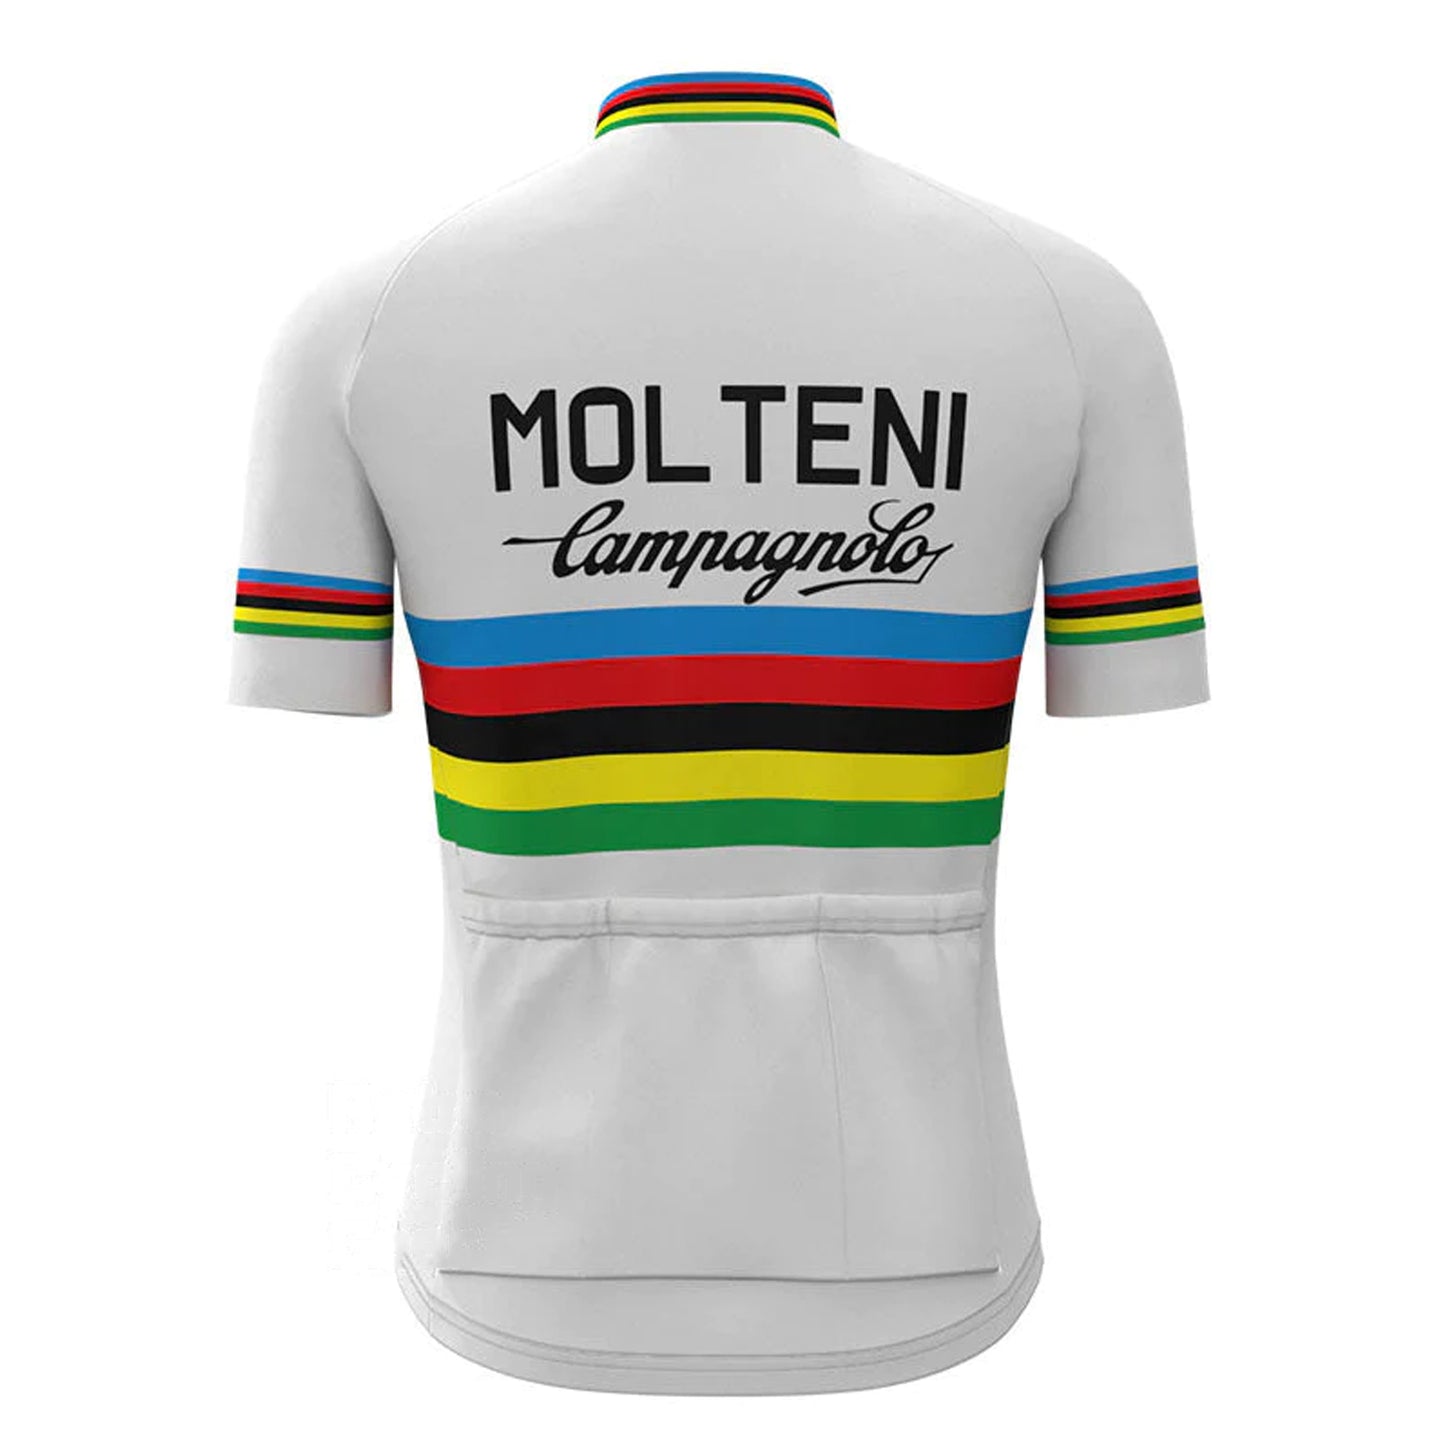 Molteni White Vintage Short Sleeve Cycling Jersey Top